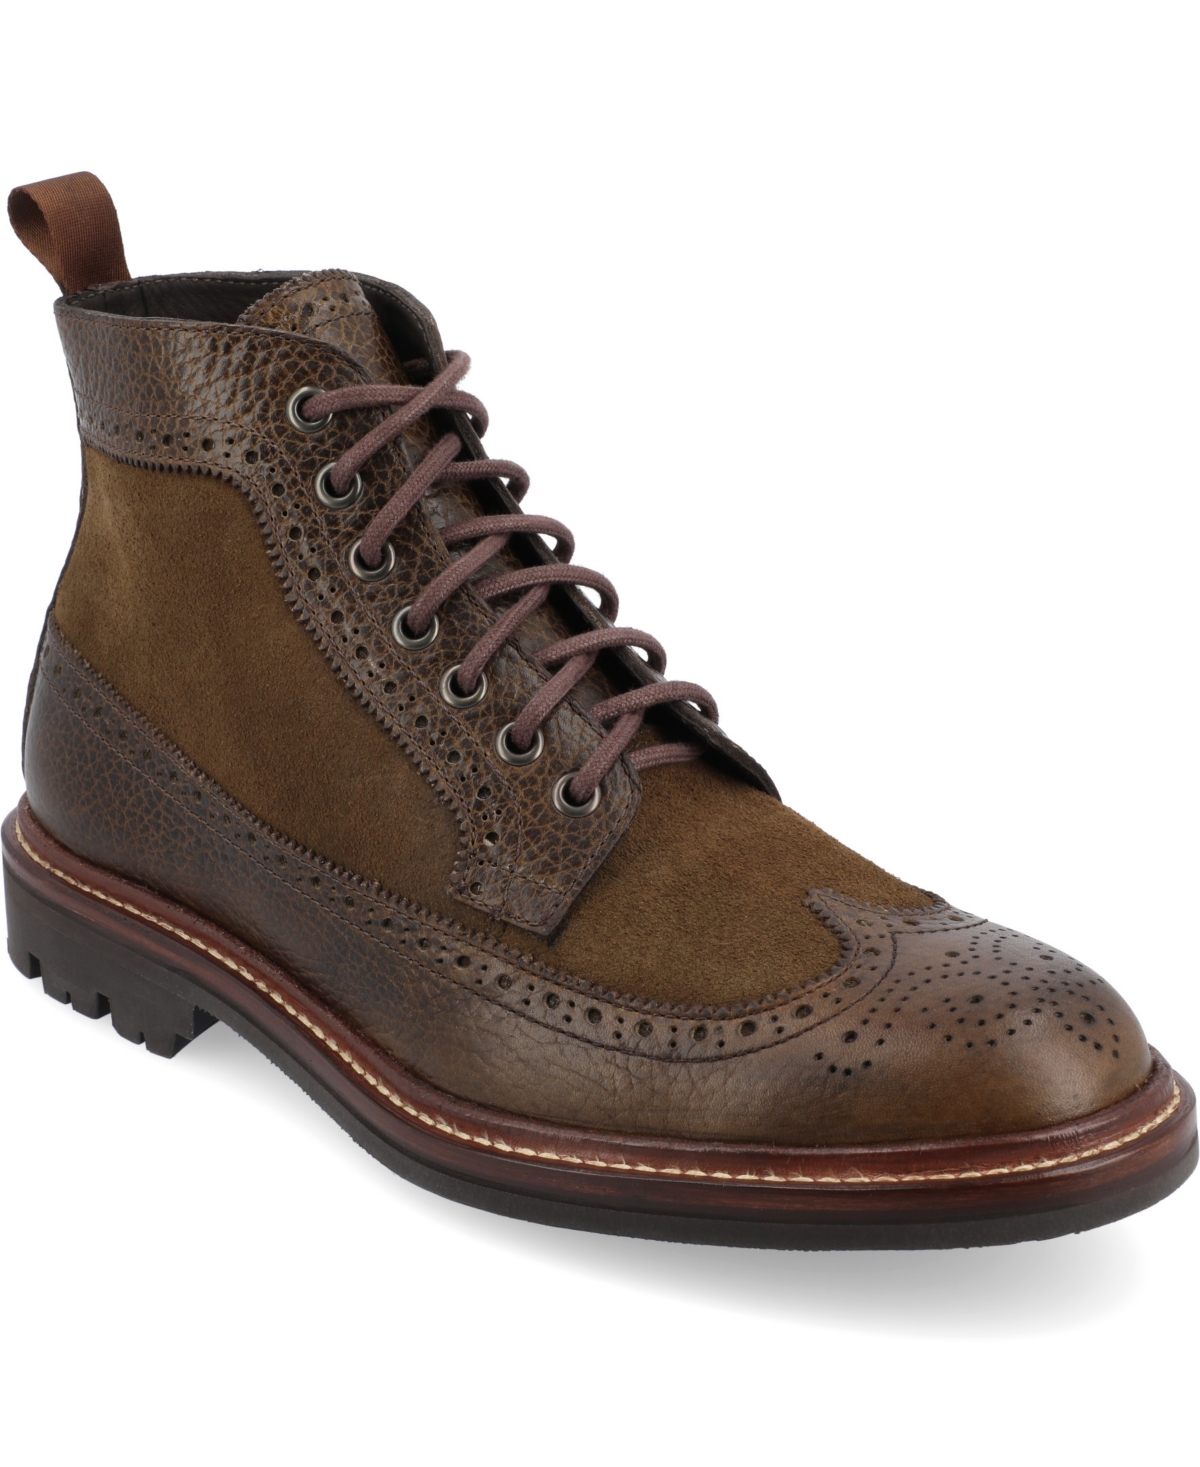 Men's The Boston Longwing Boot - Olive